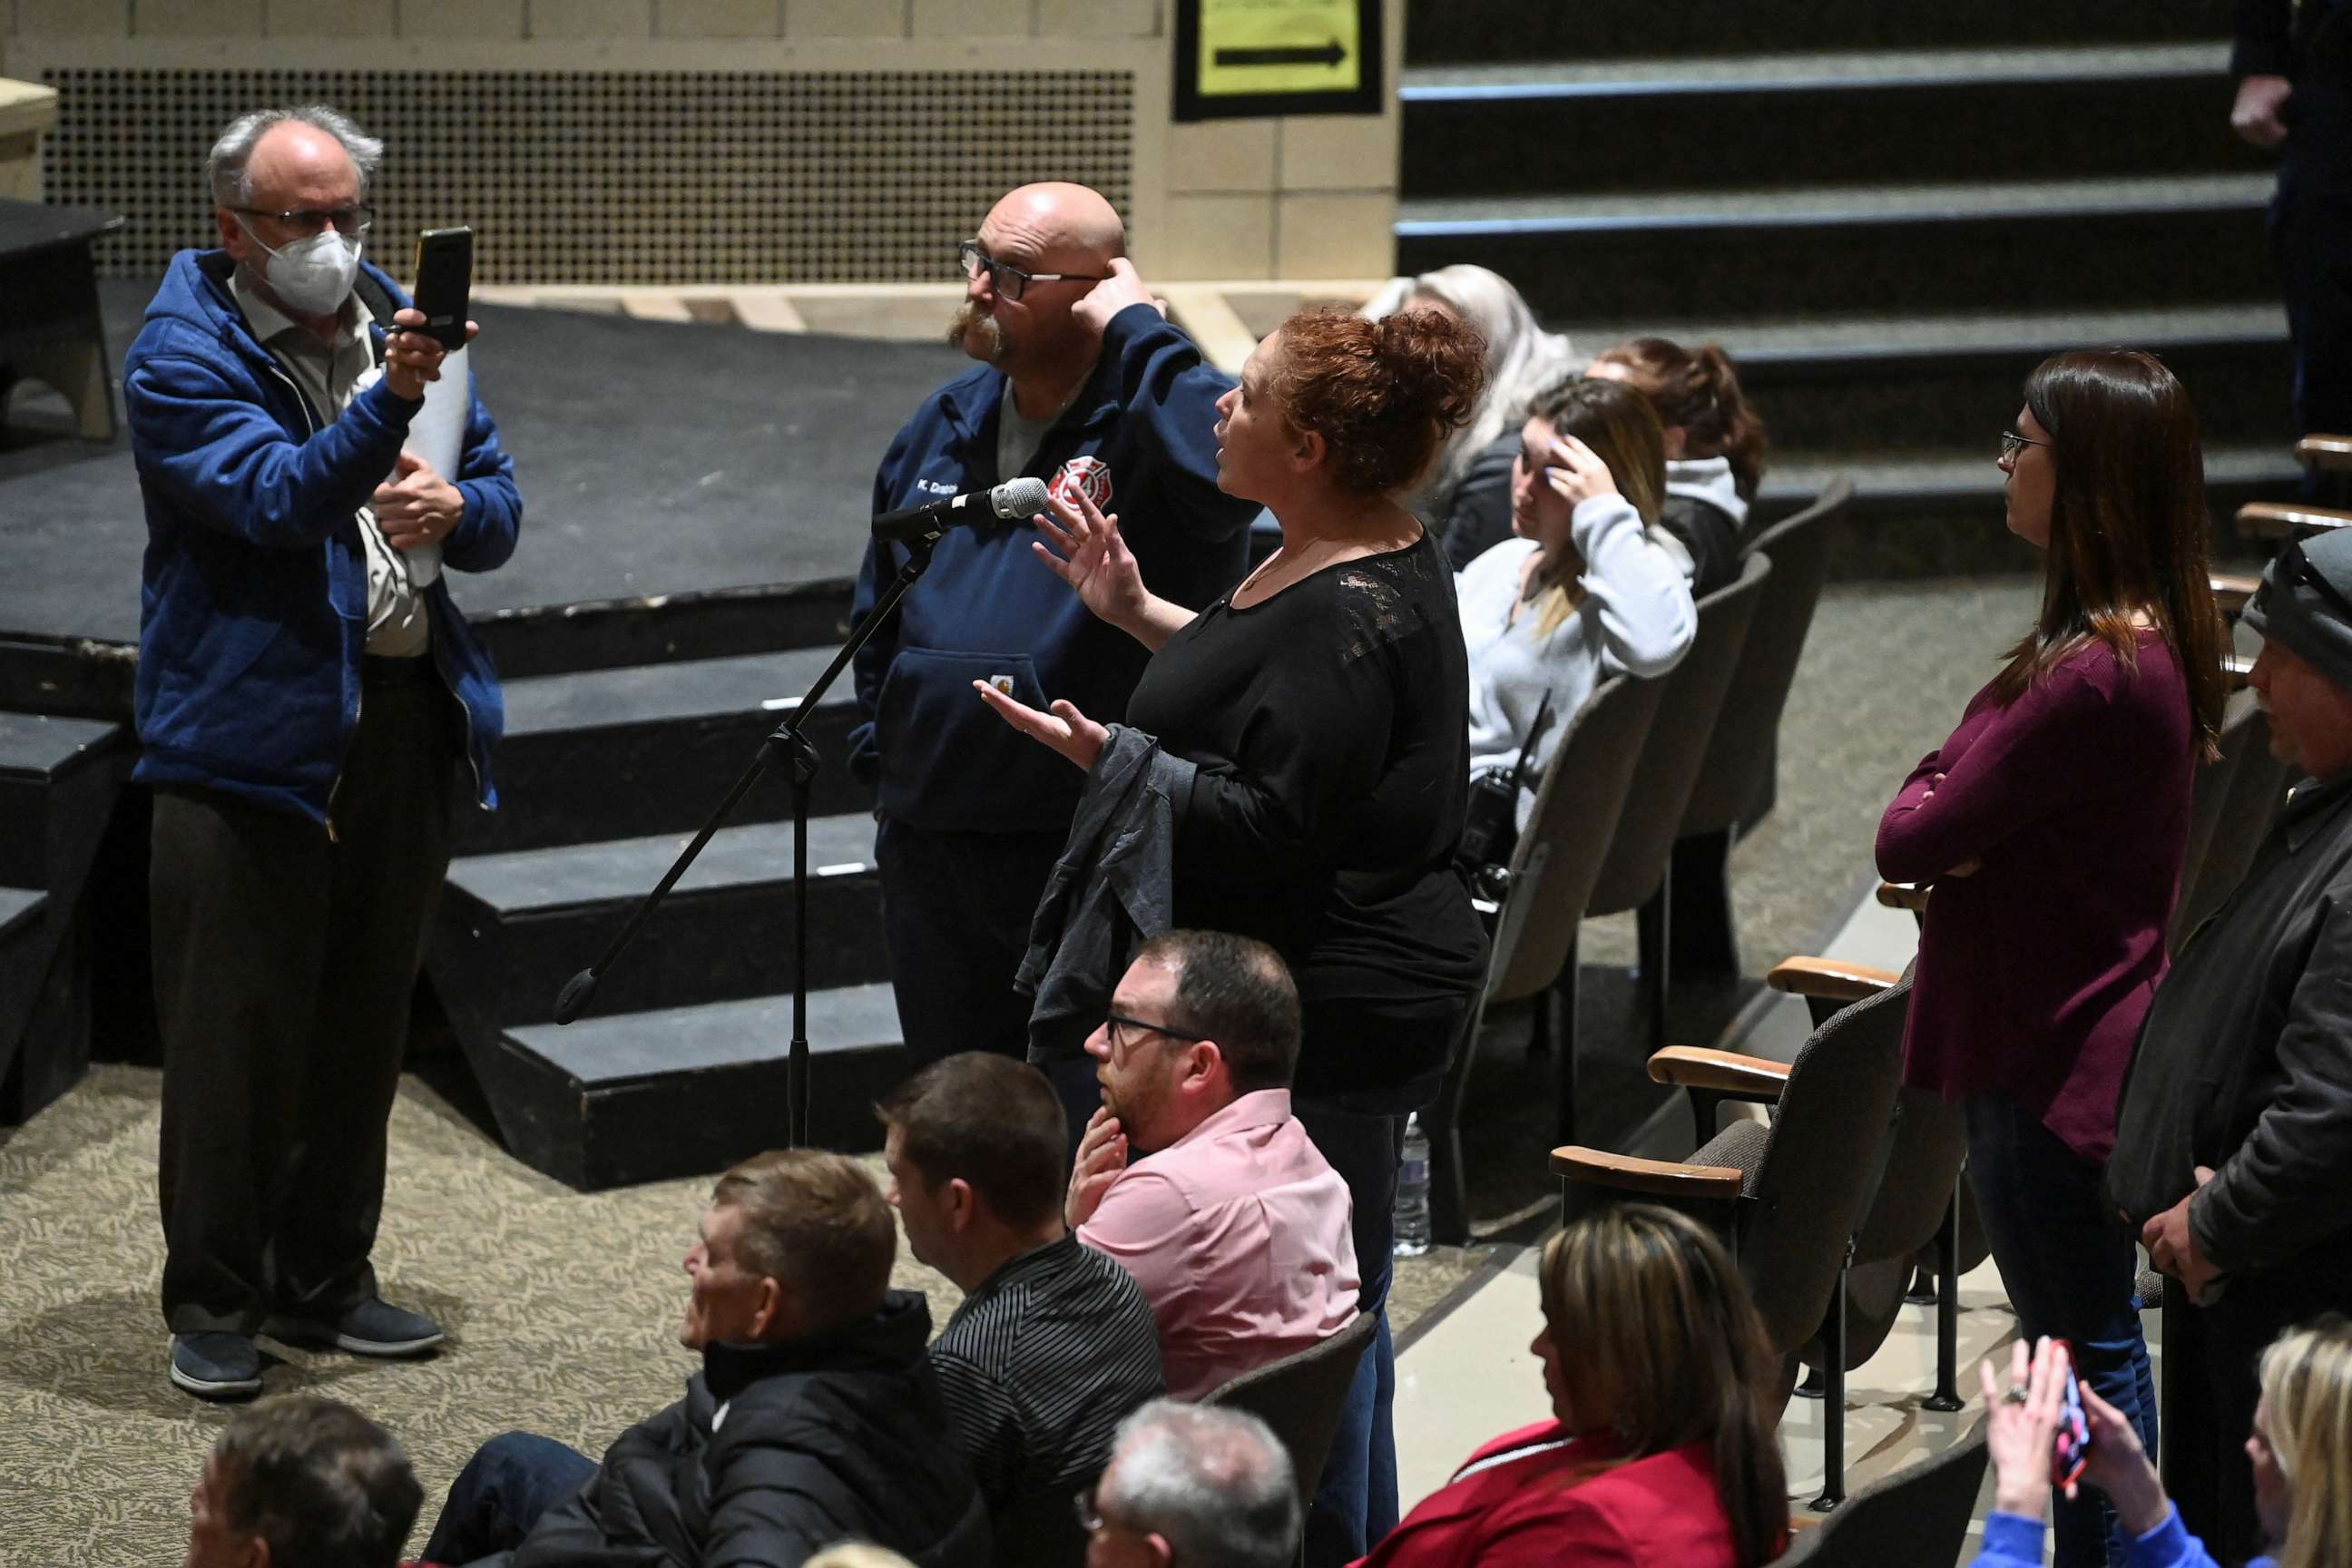 PHOTO: Residents attend a town hall to discuss the train derailment that spilled toxic chemicals, in East Palestine, Ohio, Mar. 2, 2023.